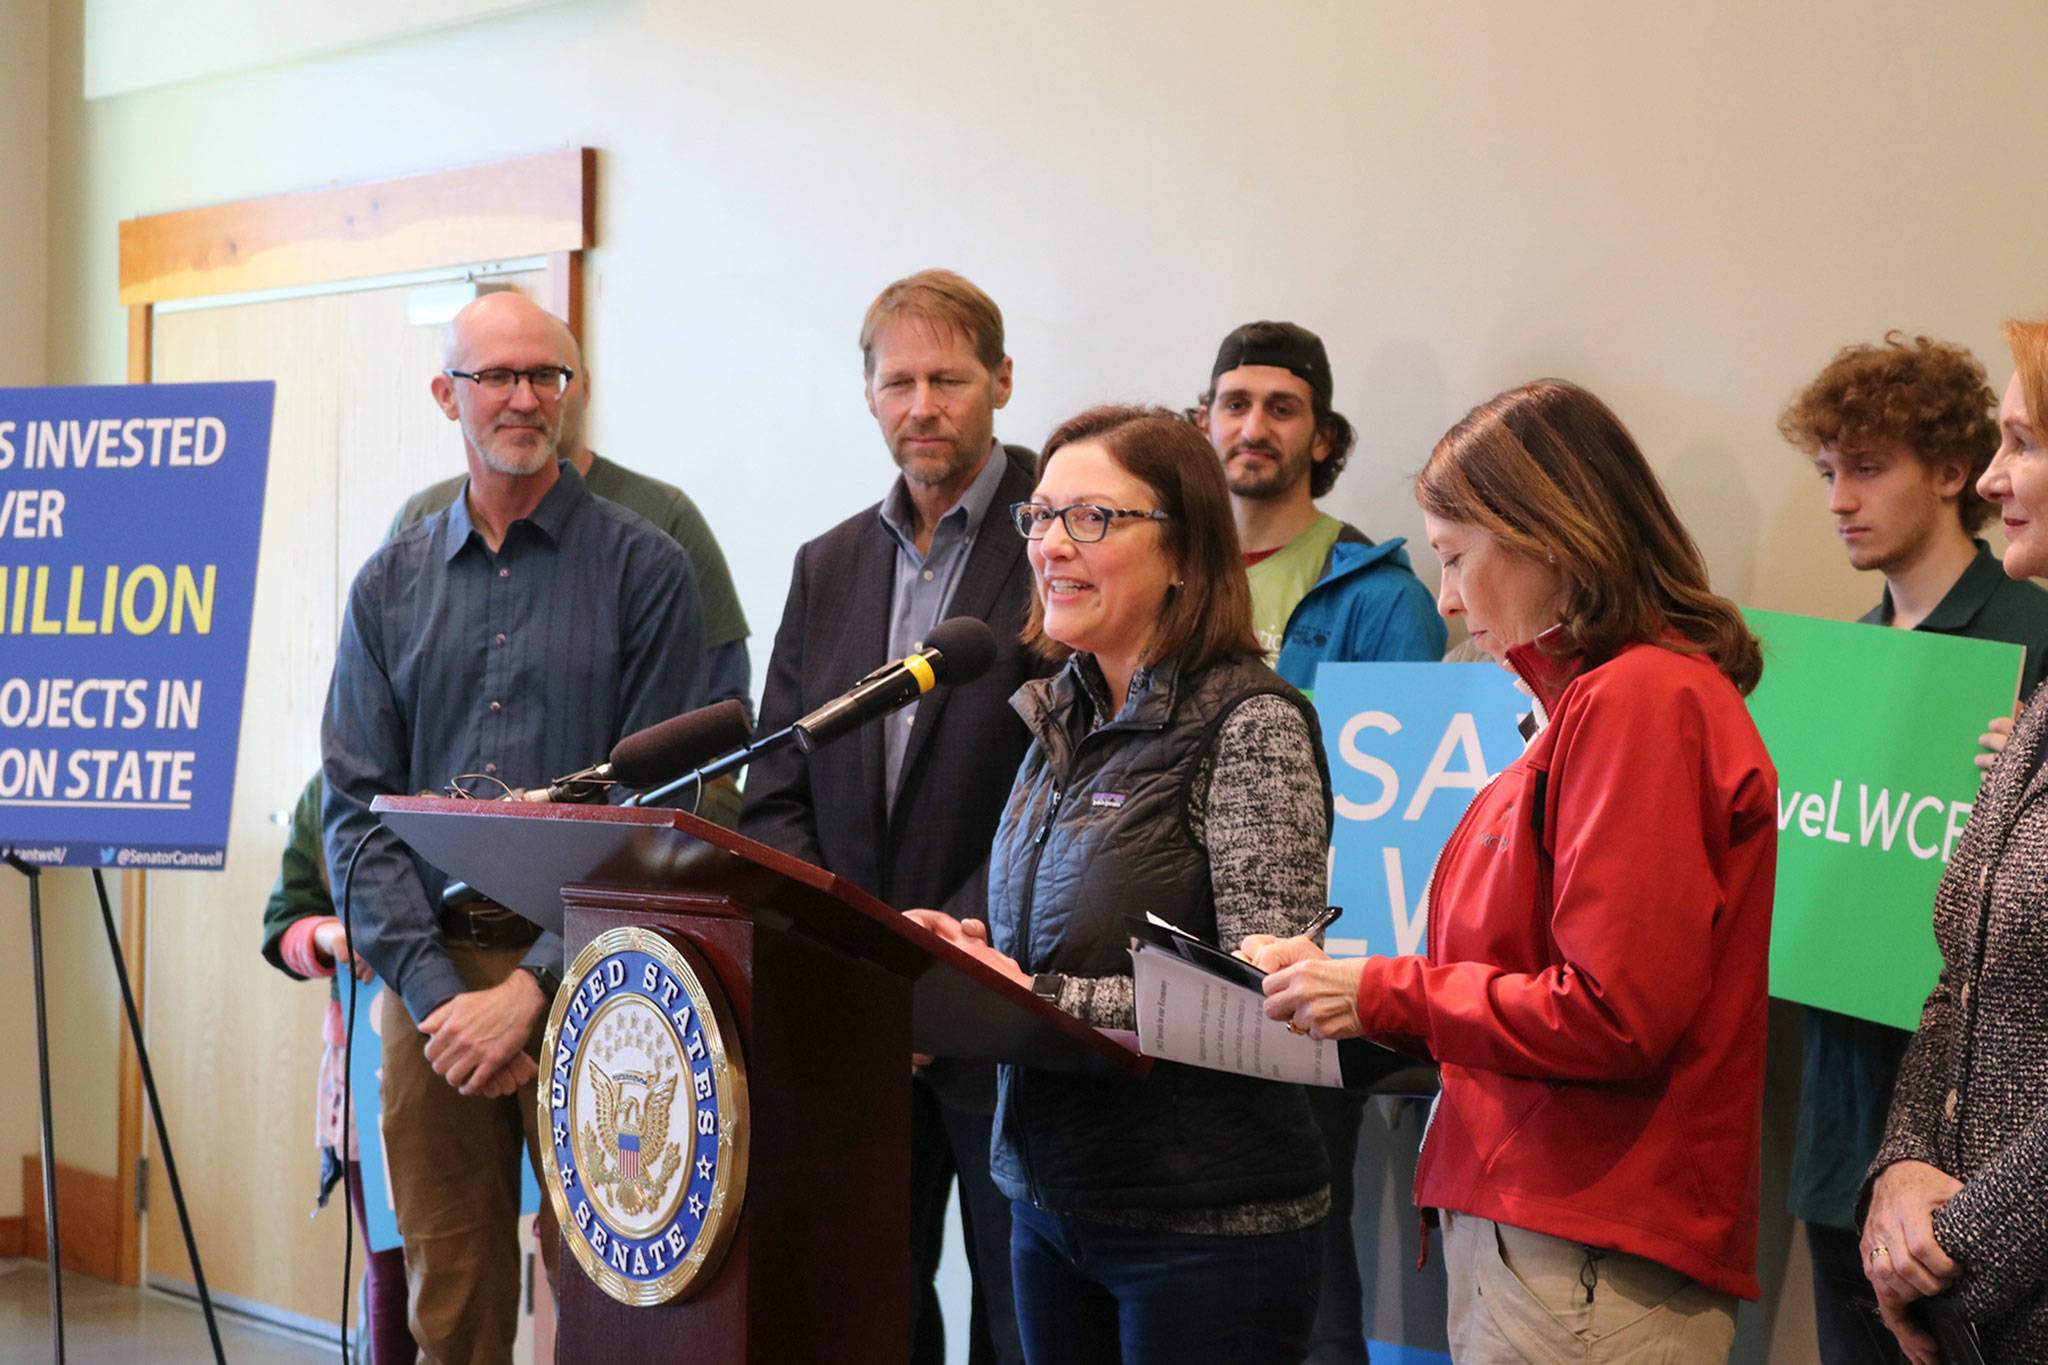 Rep. Suzan DelBene, who represents Washington’s 1st congressional district, explains how the Land and Water Conservation Fund adds billions in spending and thousands of jobs to the outdoor economy. Katie Metzger/staff photo